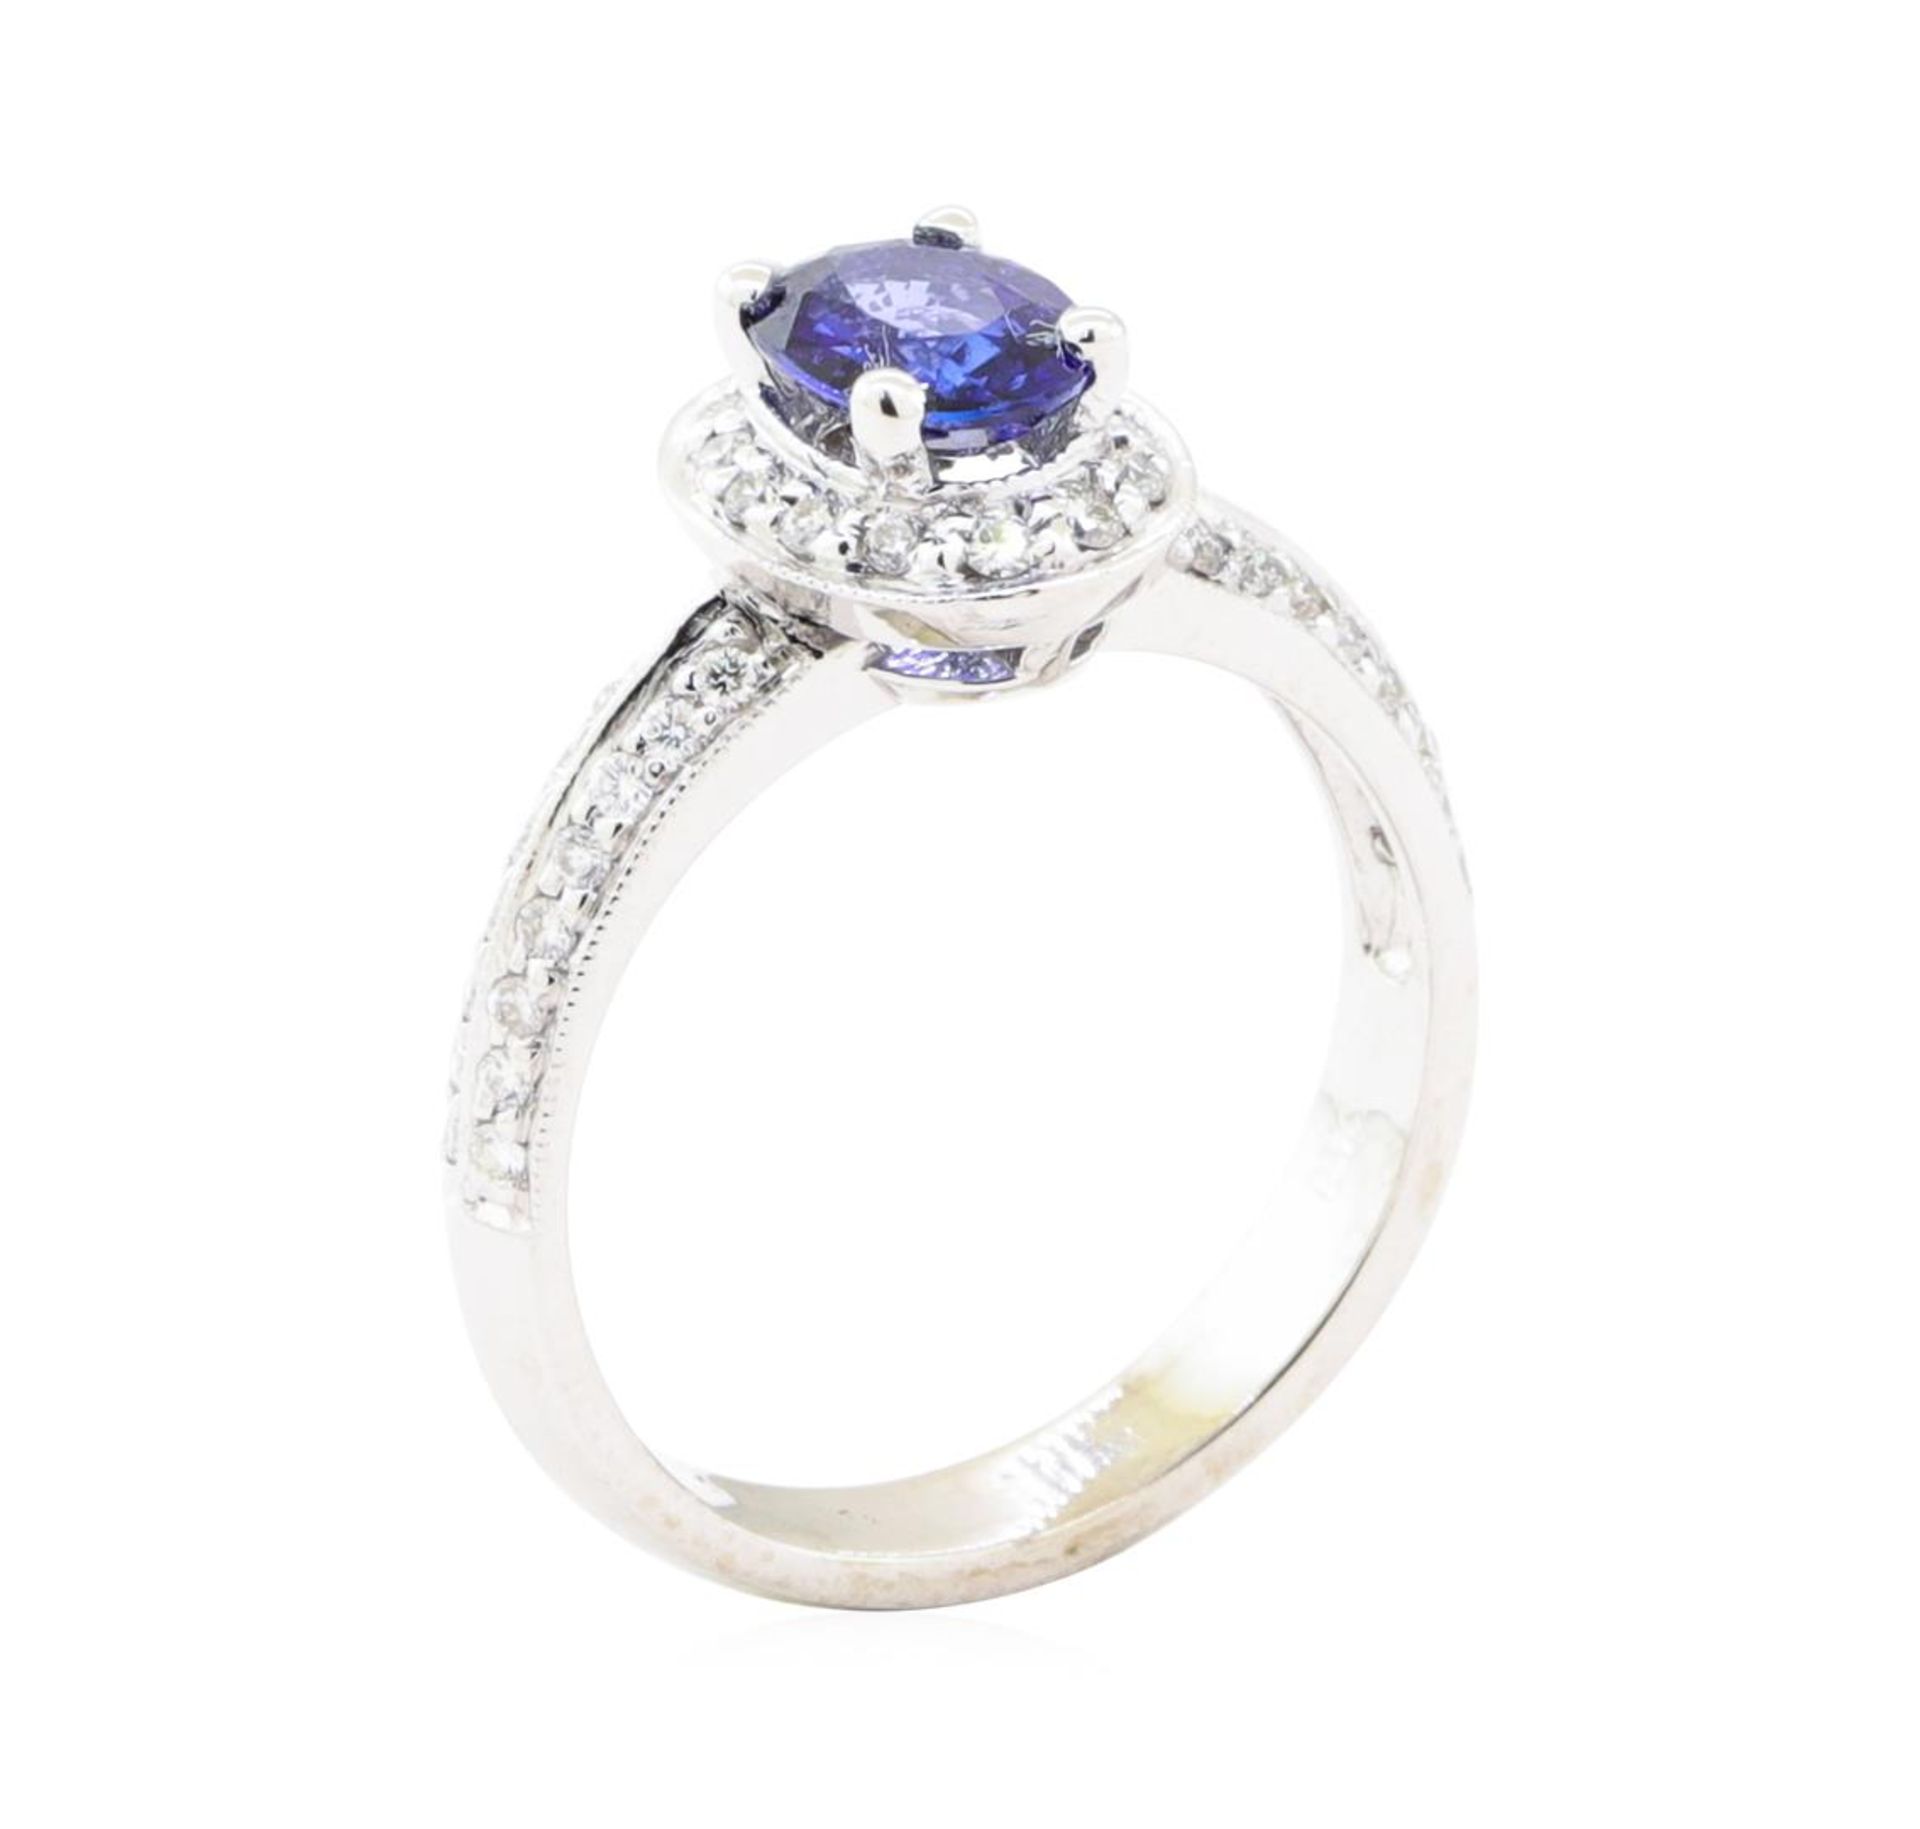 1.35 ctw Sapphire And Diamond Ring - 14KT White Gold - Image 4 of 5